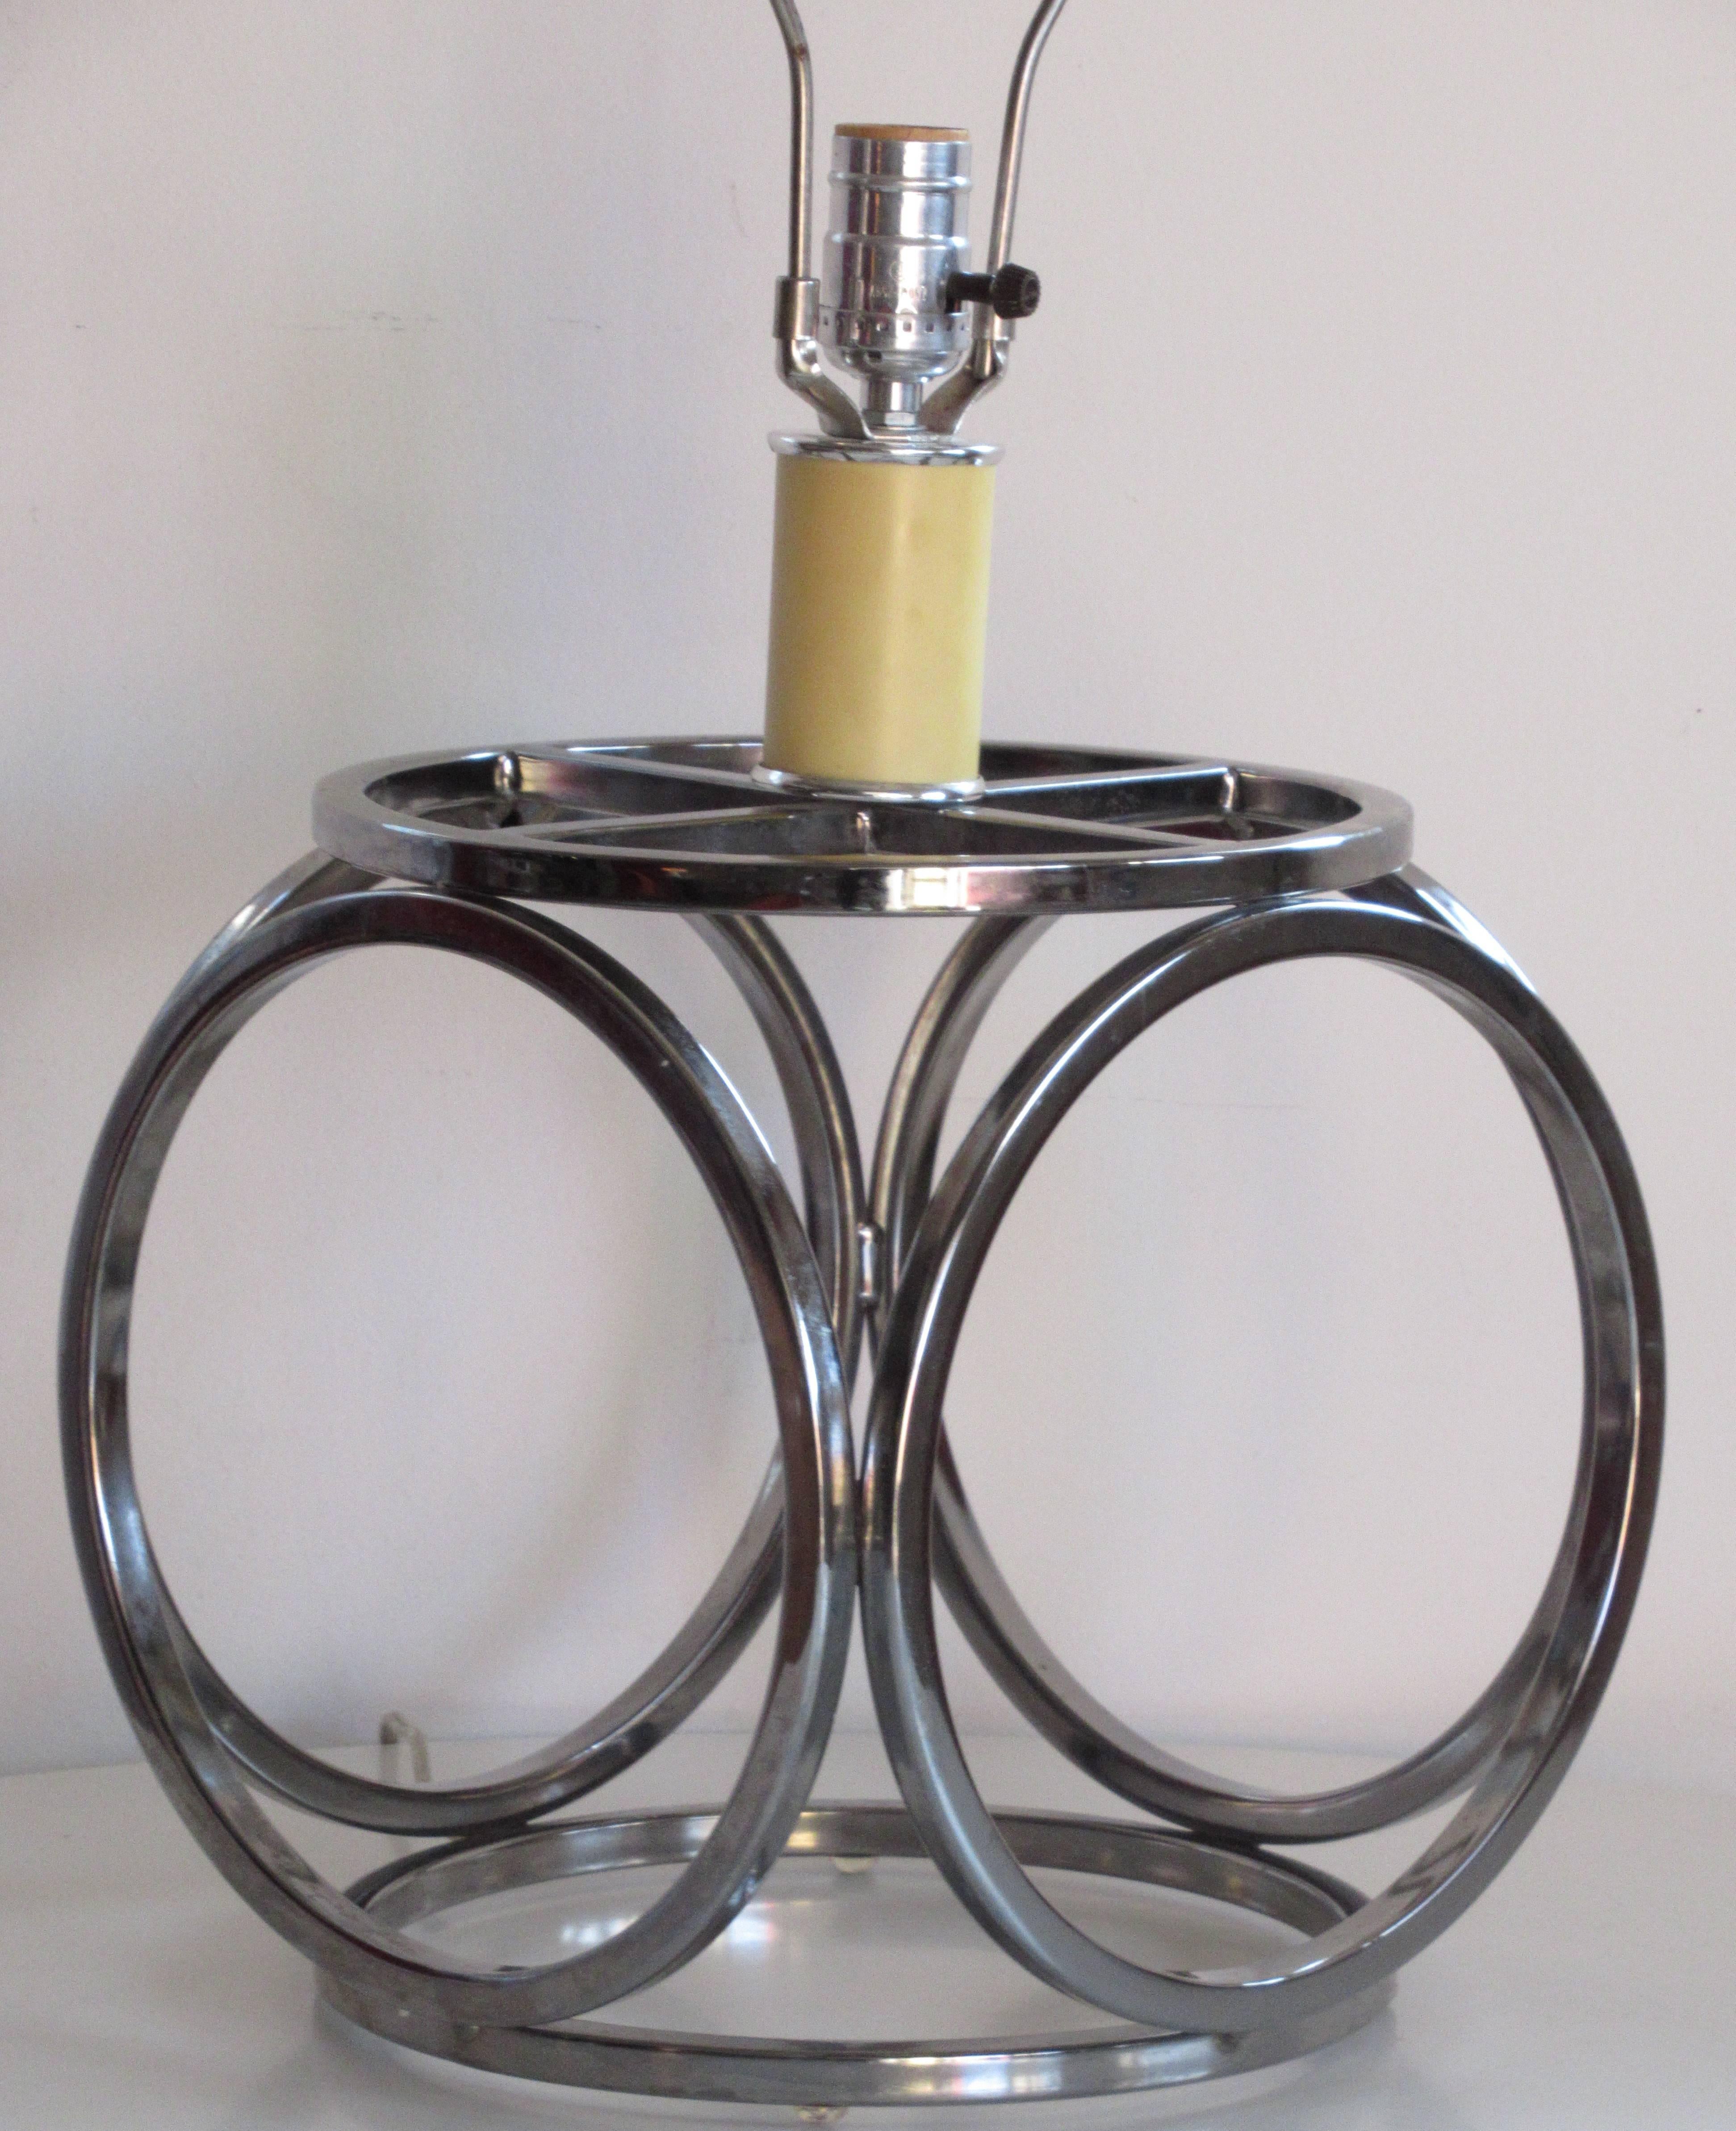 A chrome table lamp with an op art geodesic design of six joined circles, circa 1970. A good quality great looking lamp.